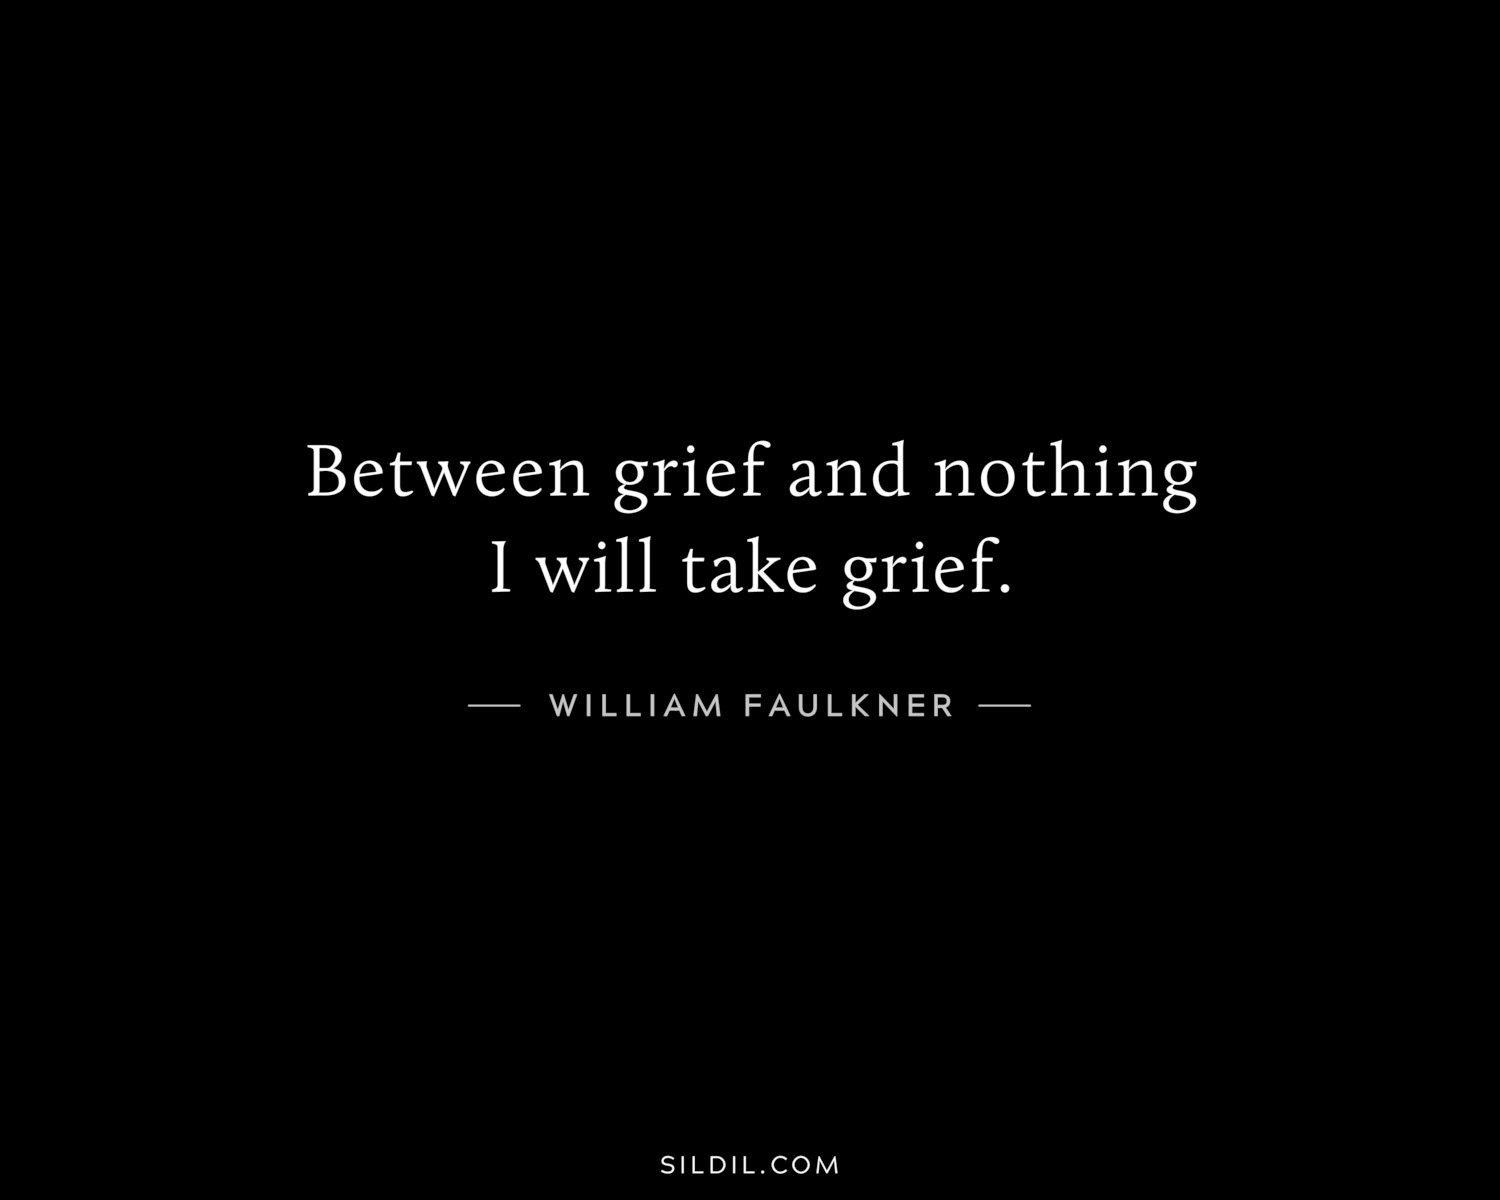 Between grief and nothing I will take grief.